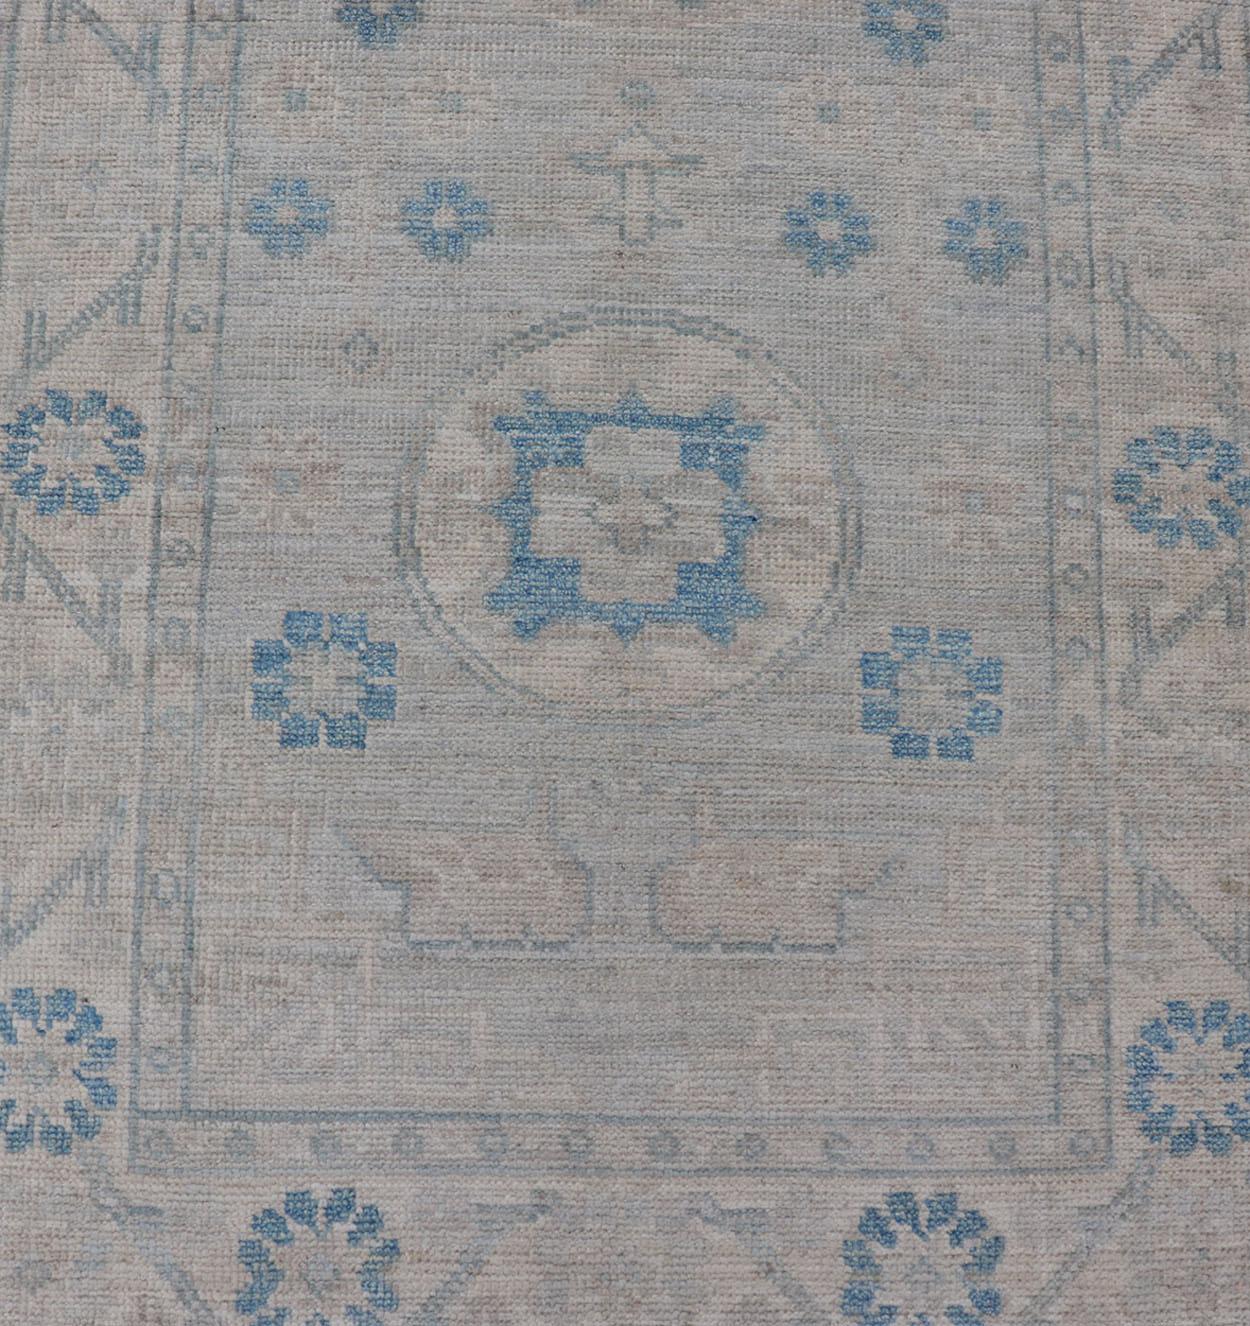 Hand-Knotted Modern Oushak Medallion Design Runner In Blue & Earthy Colors With Medallions 